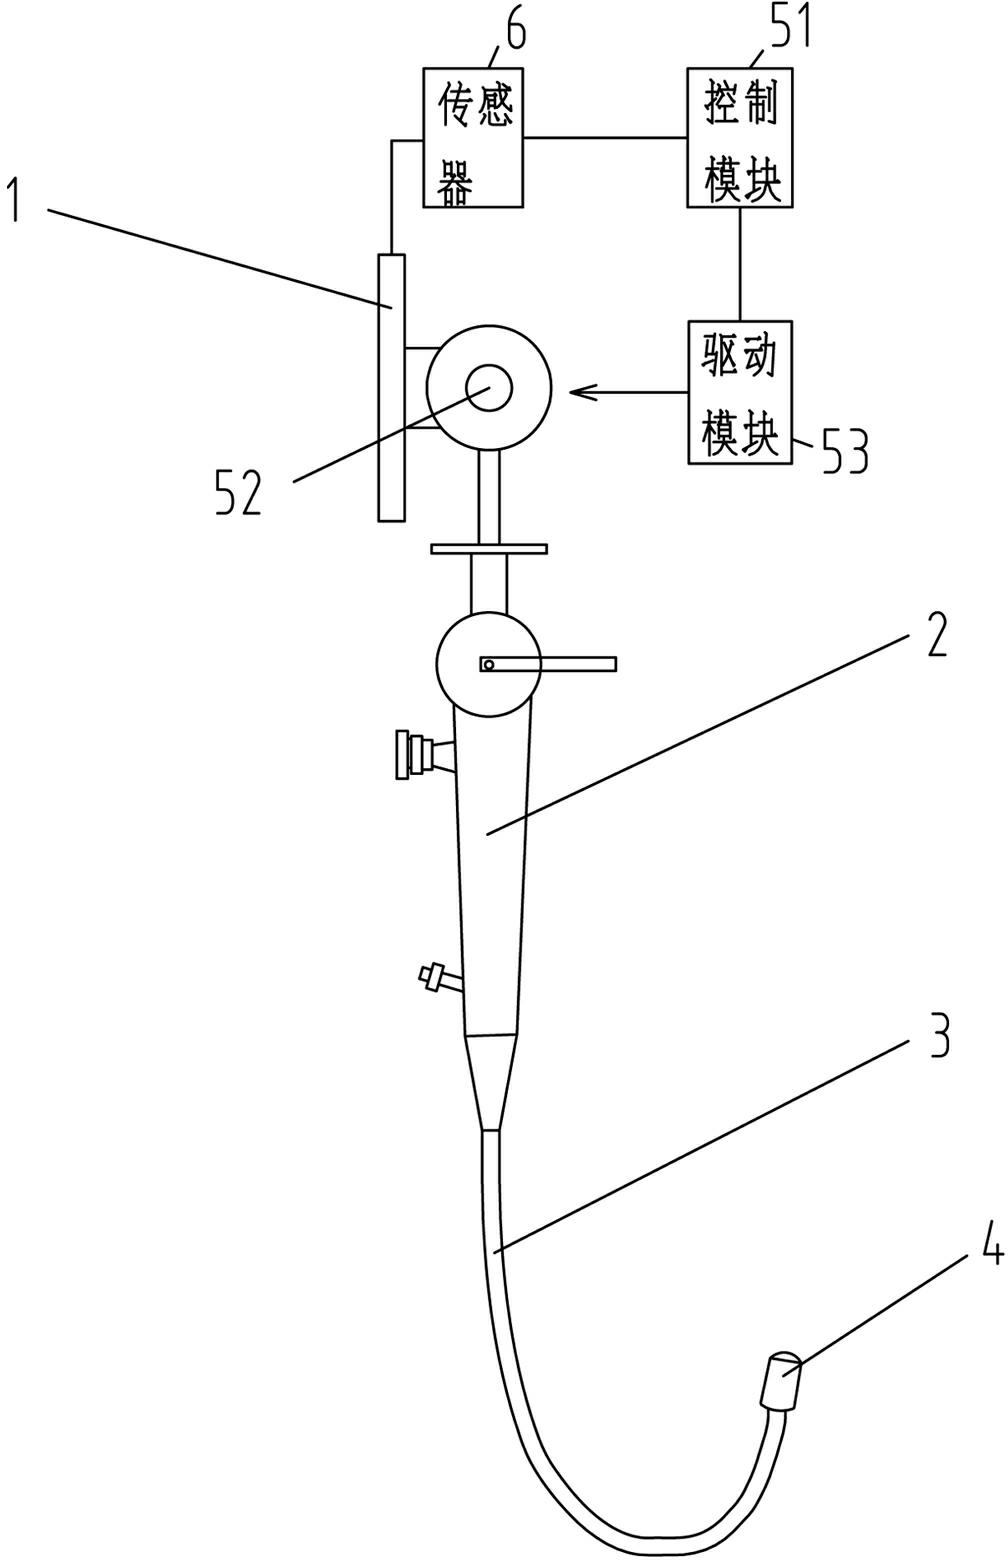 Endoscope having automatic positioning and viewing unit